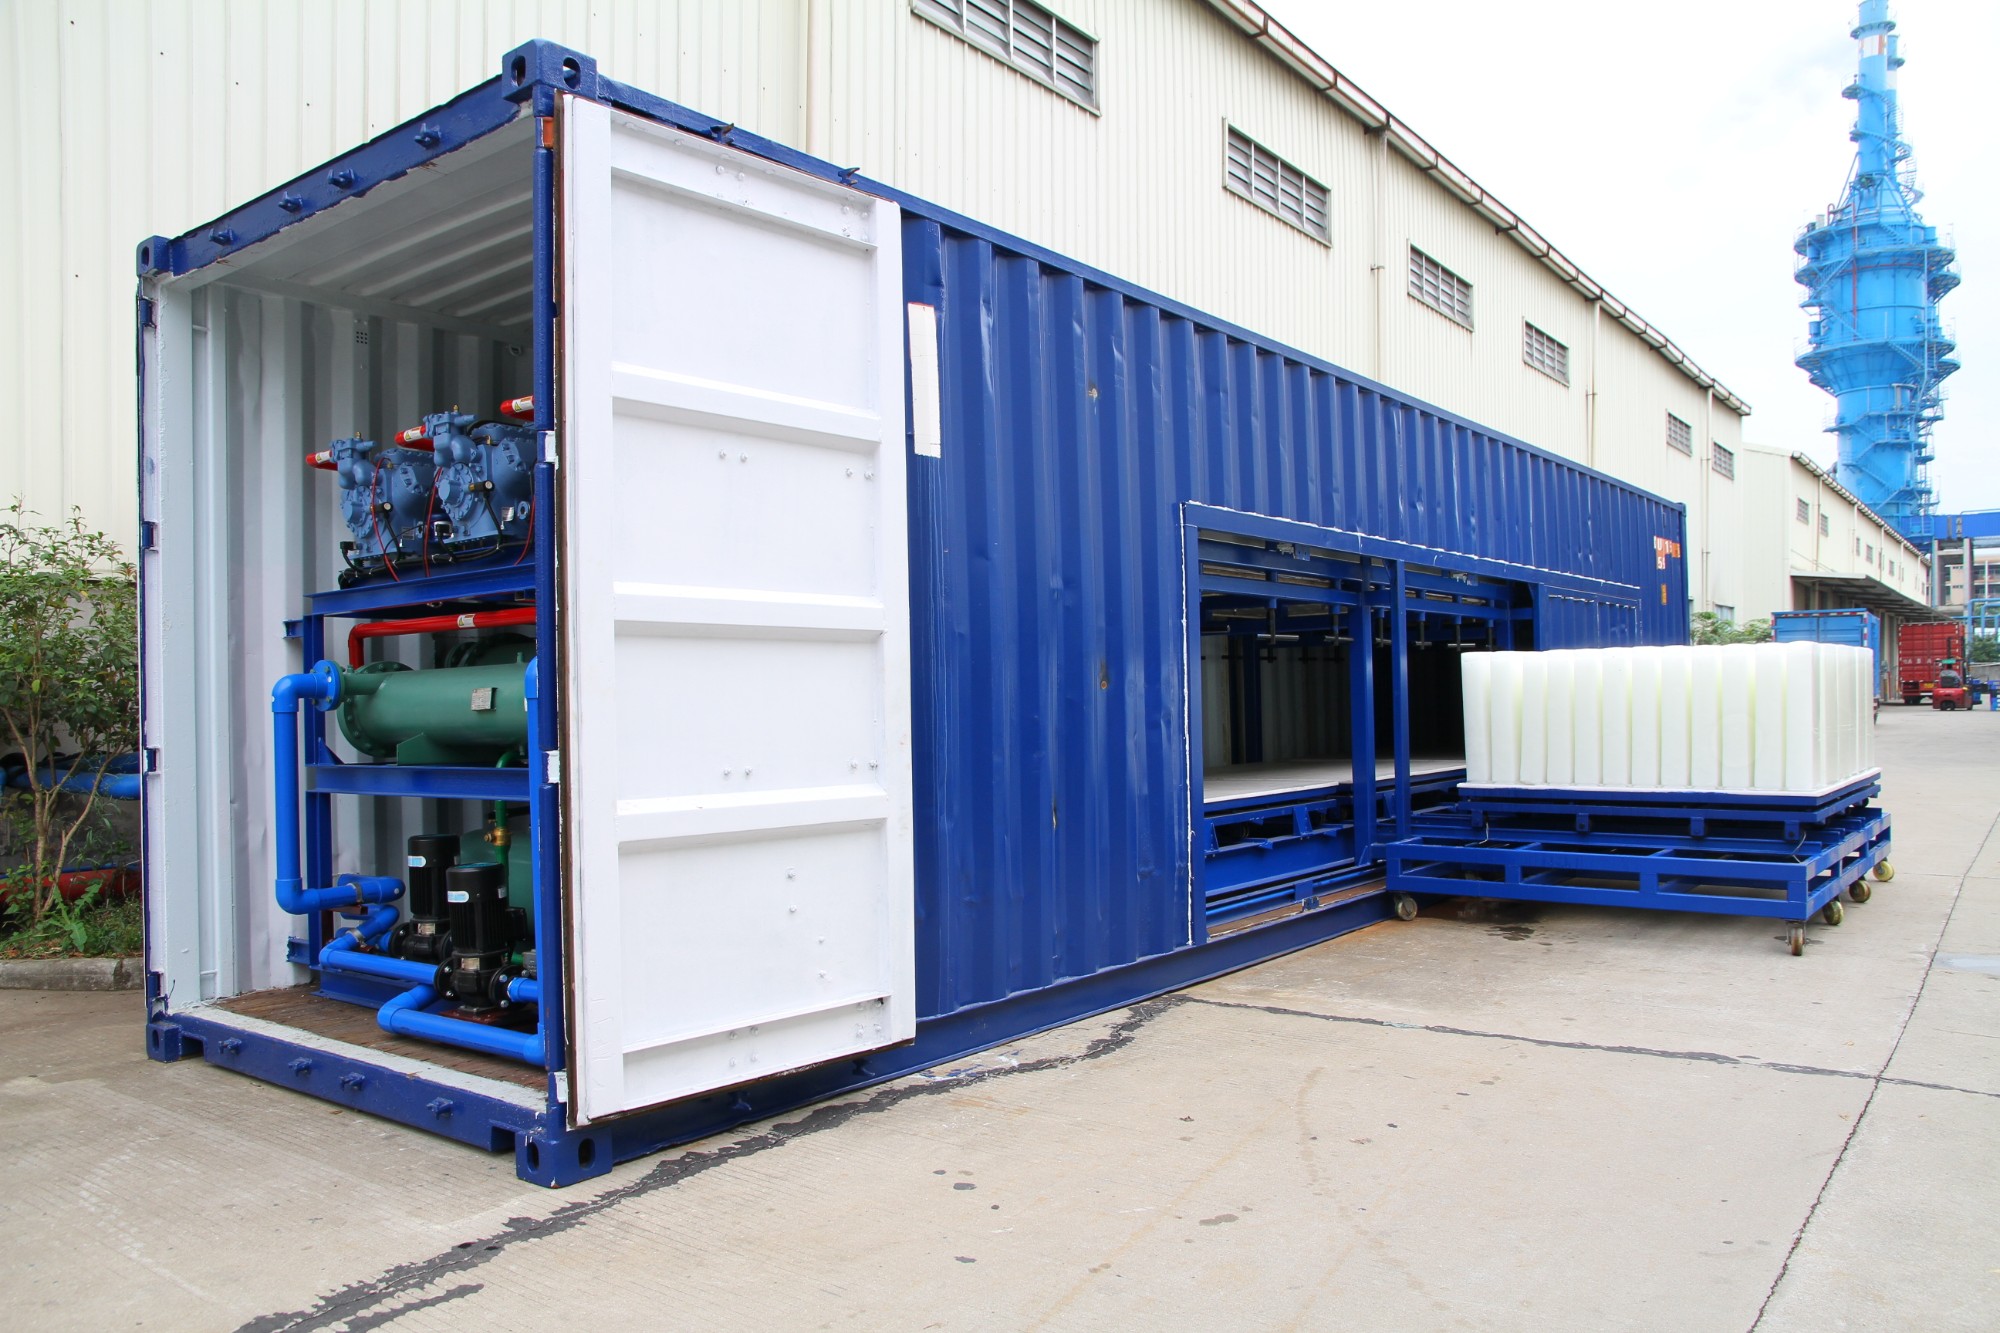 Direct Cooling Aluminum Type 10tons Containerized Block Ice Machine